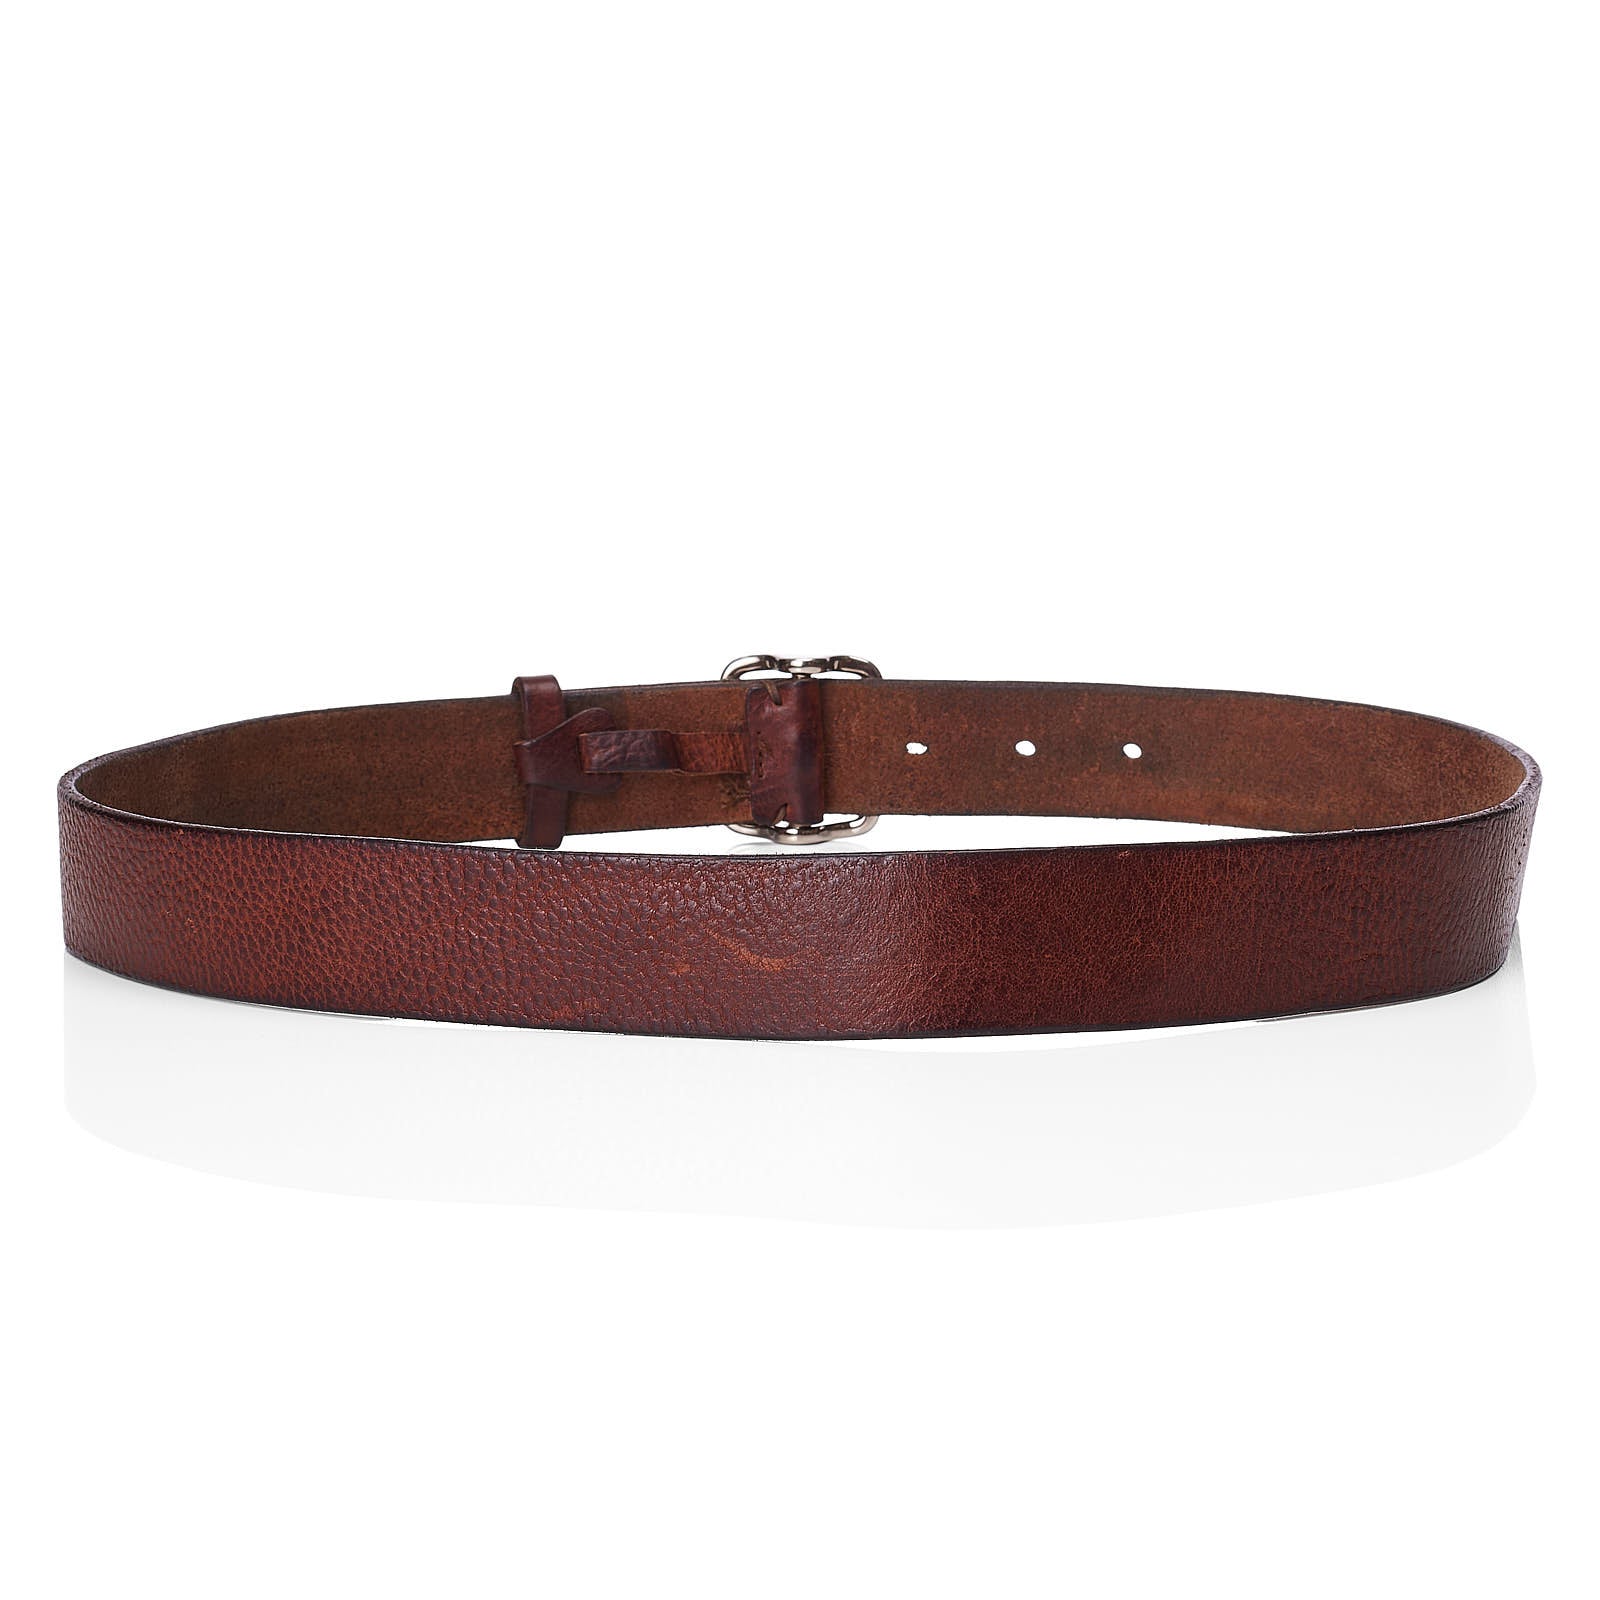 BRUNELLO CUCINELLI  Brown Leather Belt with Silver-Tone Buckle 90cm 36"